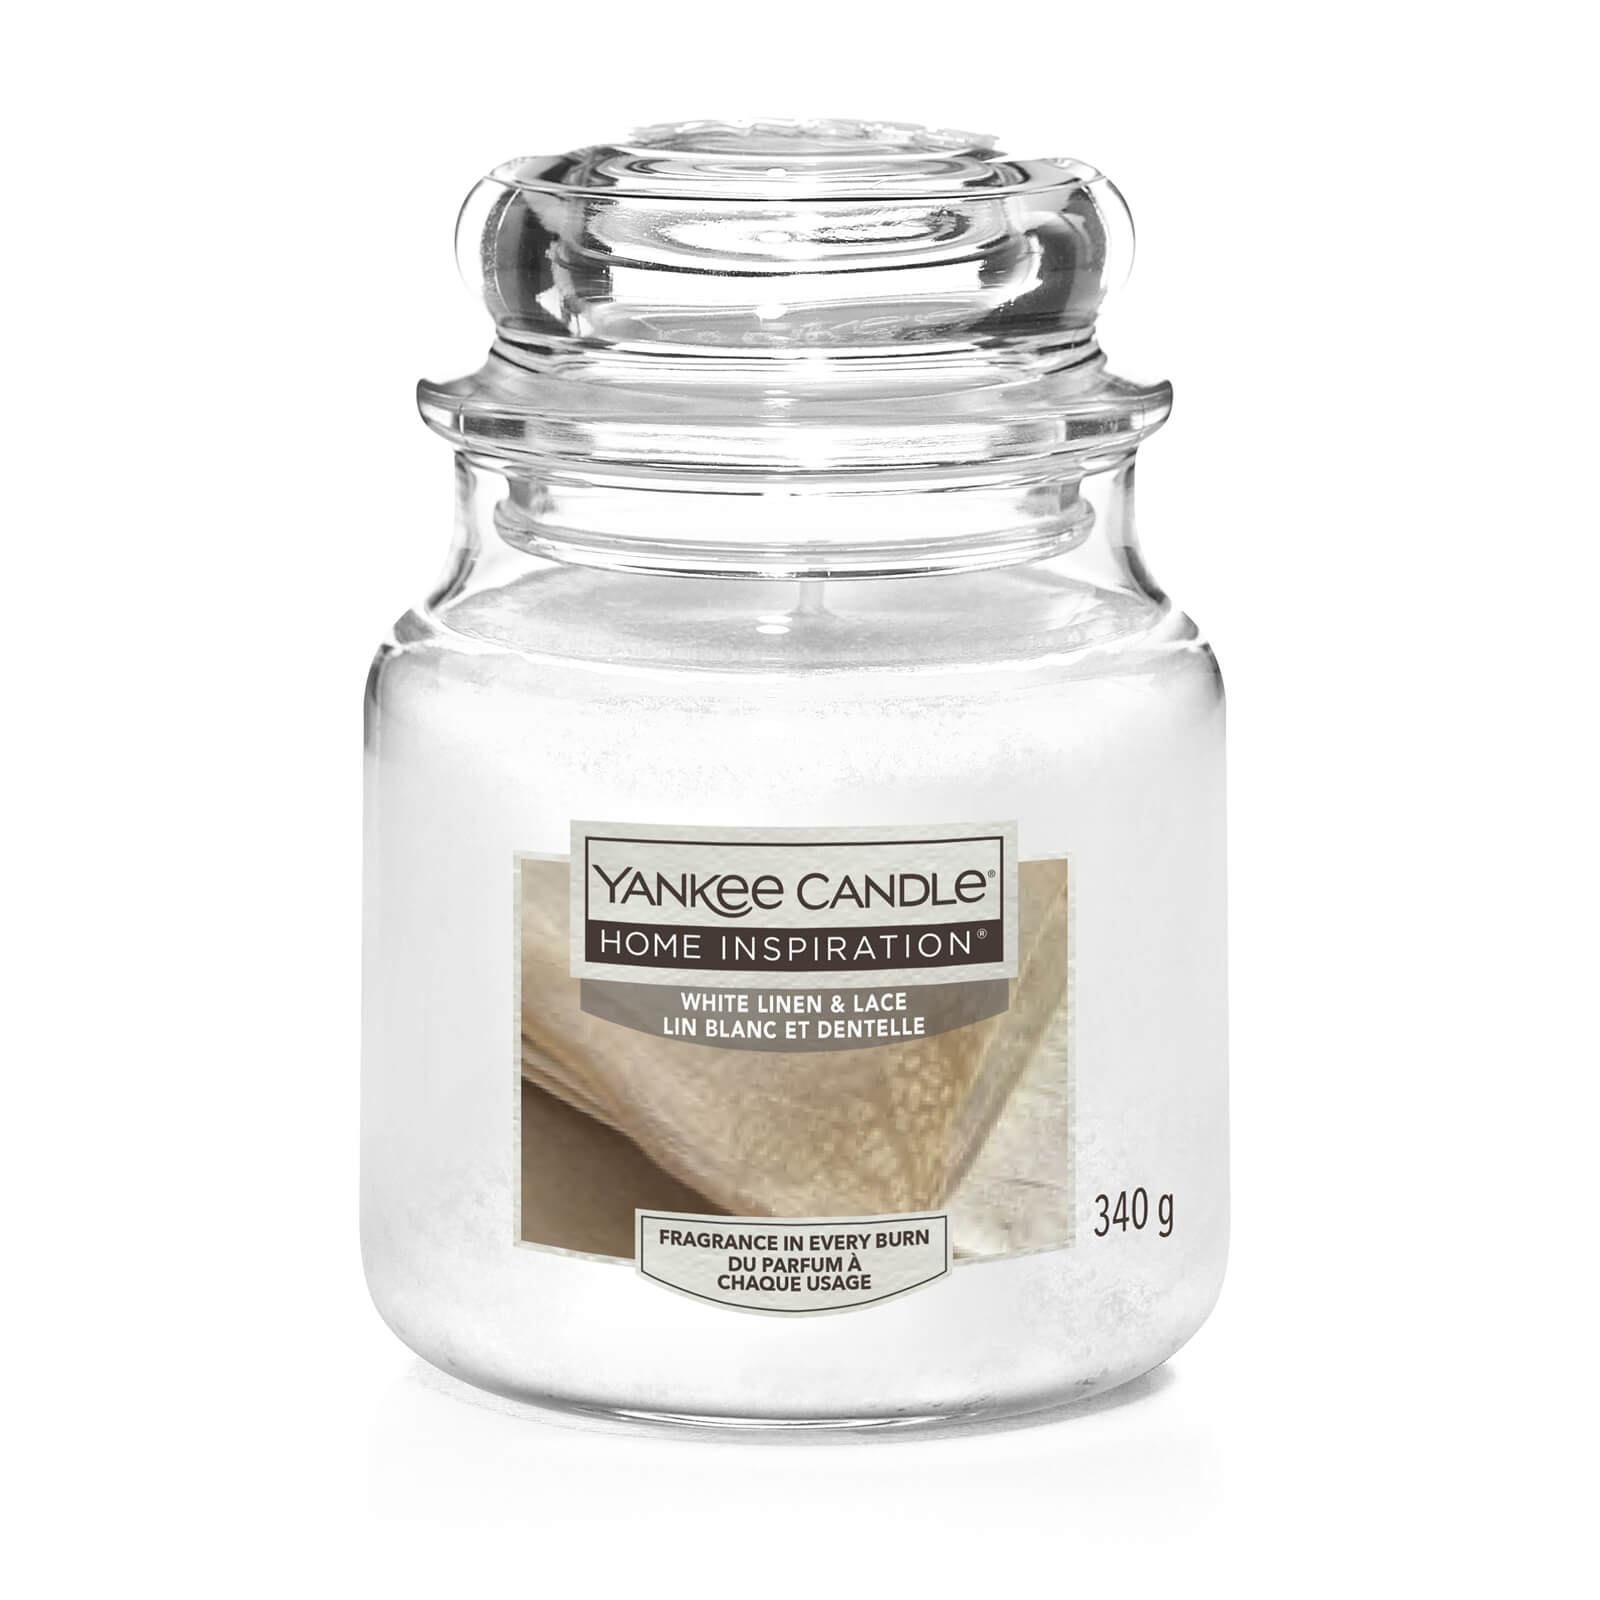 Yankee Candle Home Inspiration Scented Candle - Medium Jar - White Linen & Lace